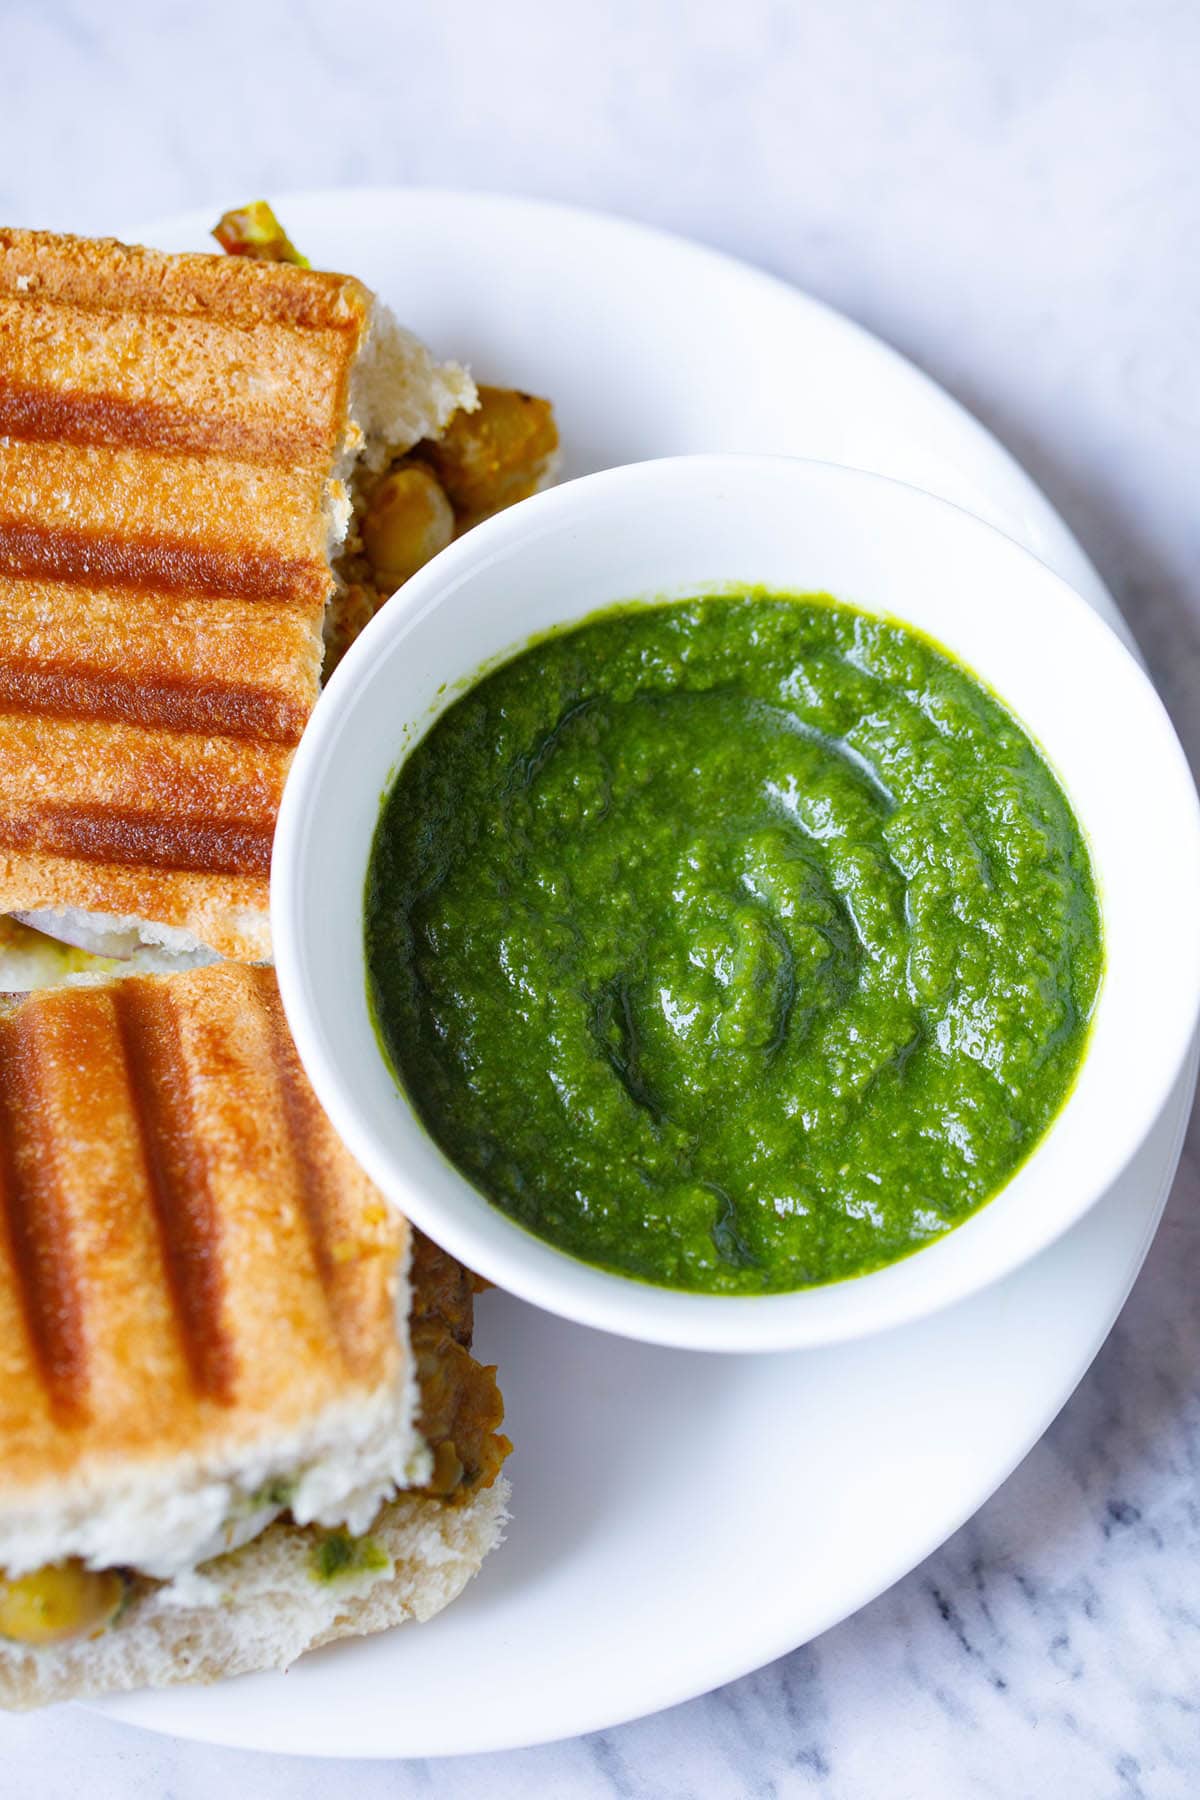 top shot of coriander chutney in white bowl placed next to grilled sandwiches on a white plate